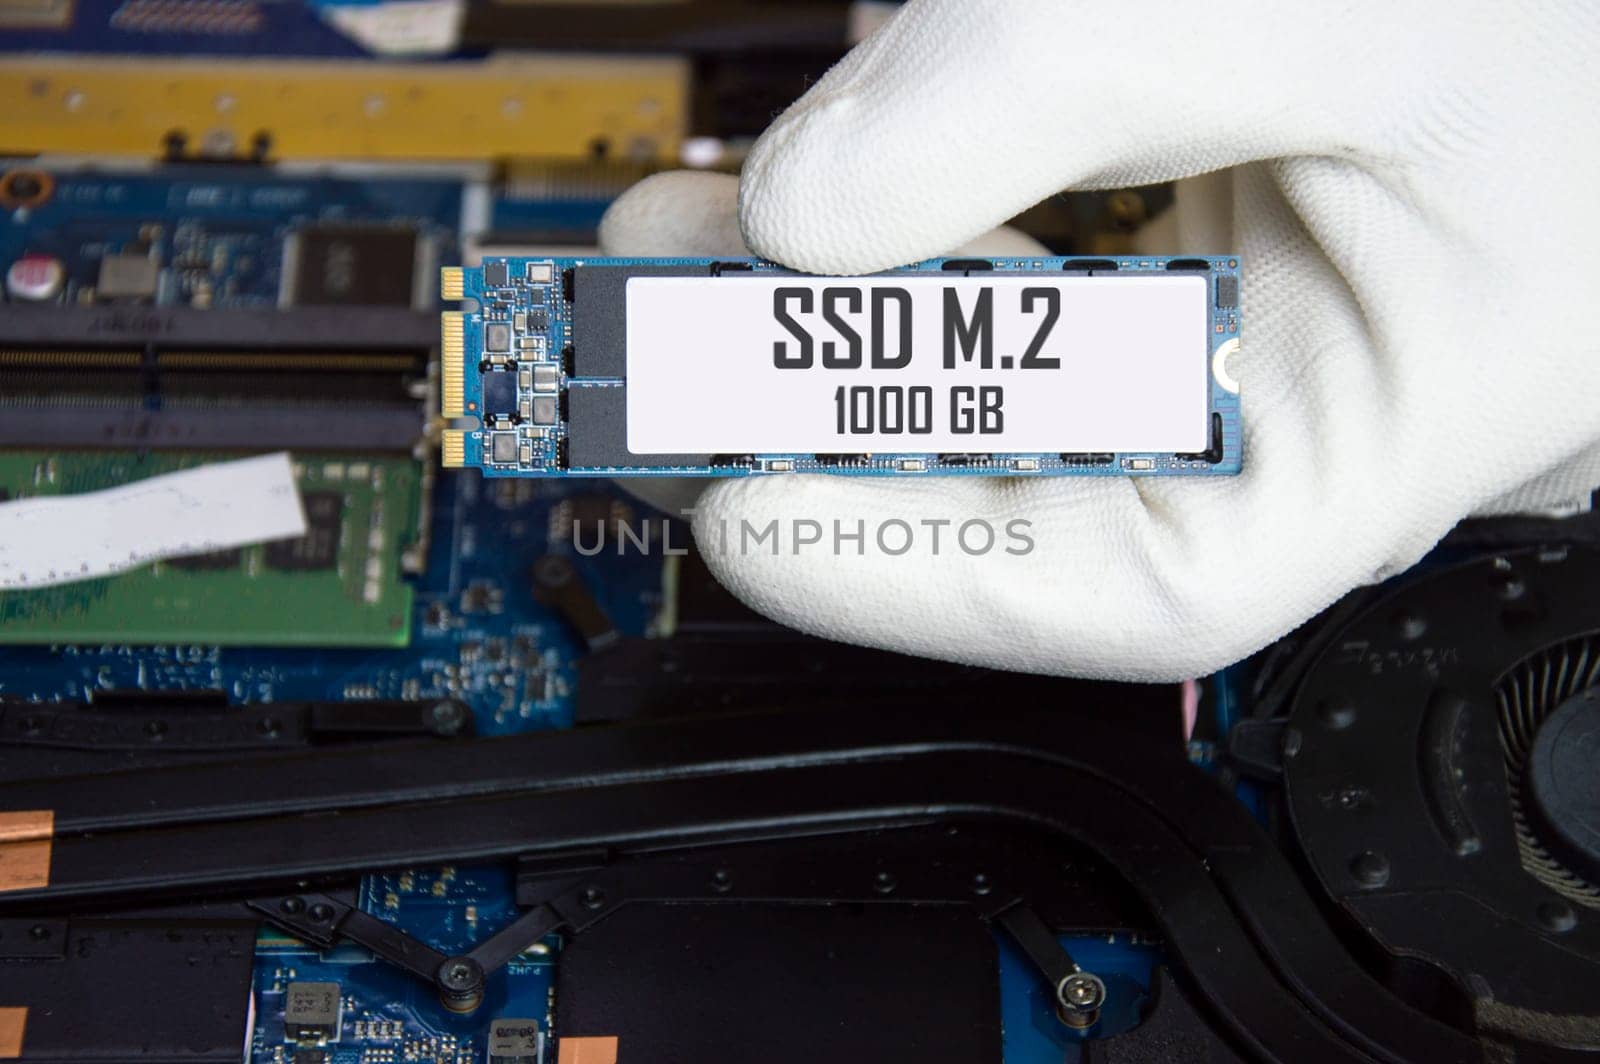 SSD M.2 is very popular new technology, small size and high performance, SSD M.2 in hand.